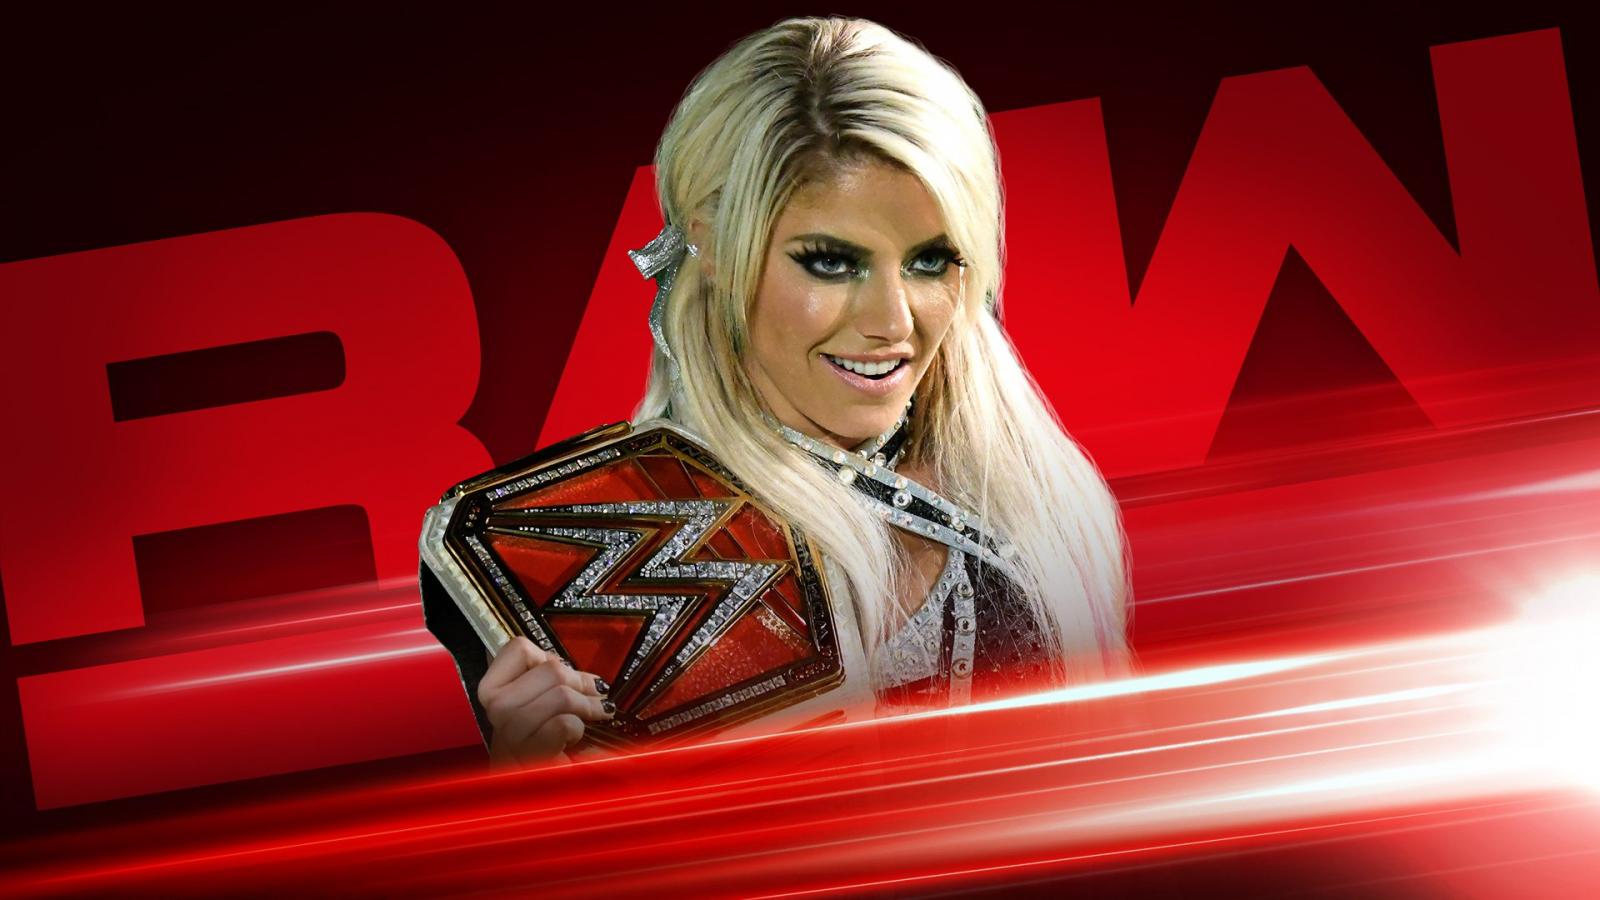 Praise and glory to the NEW Raw Women's Champion